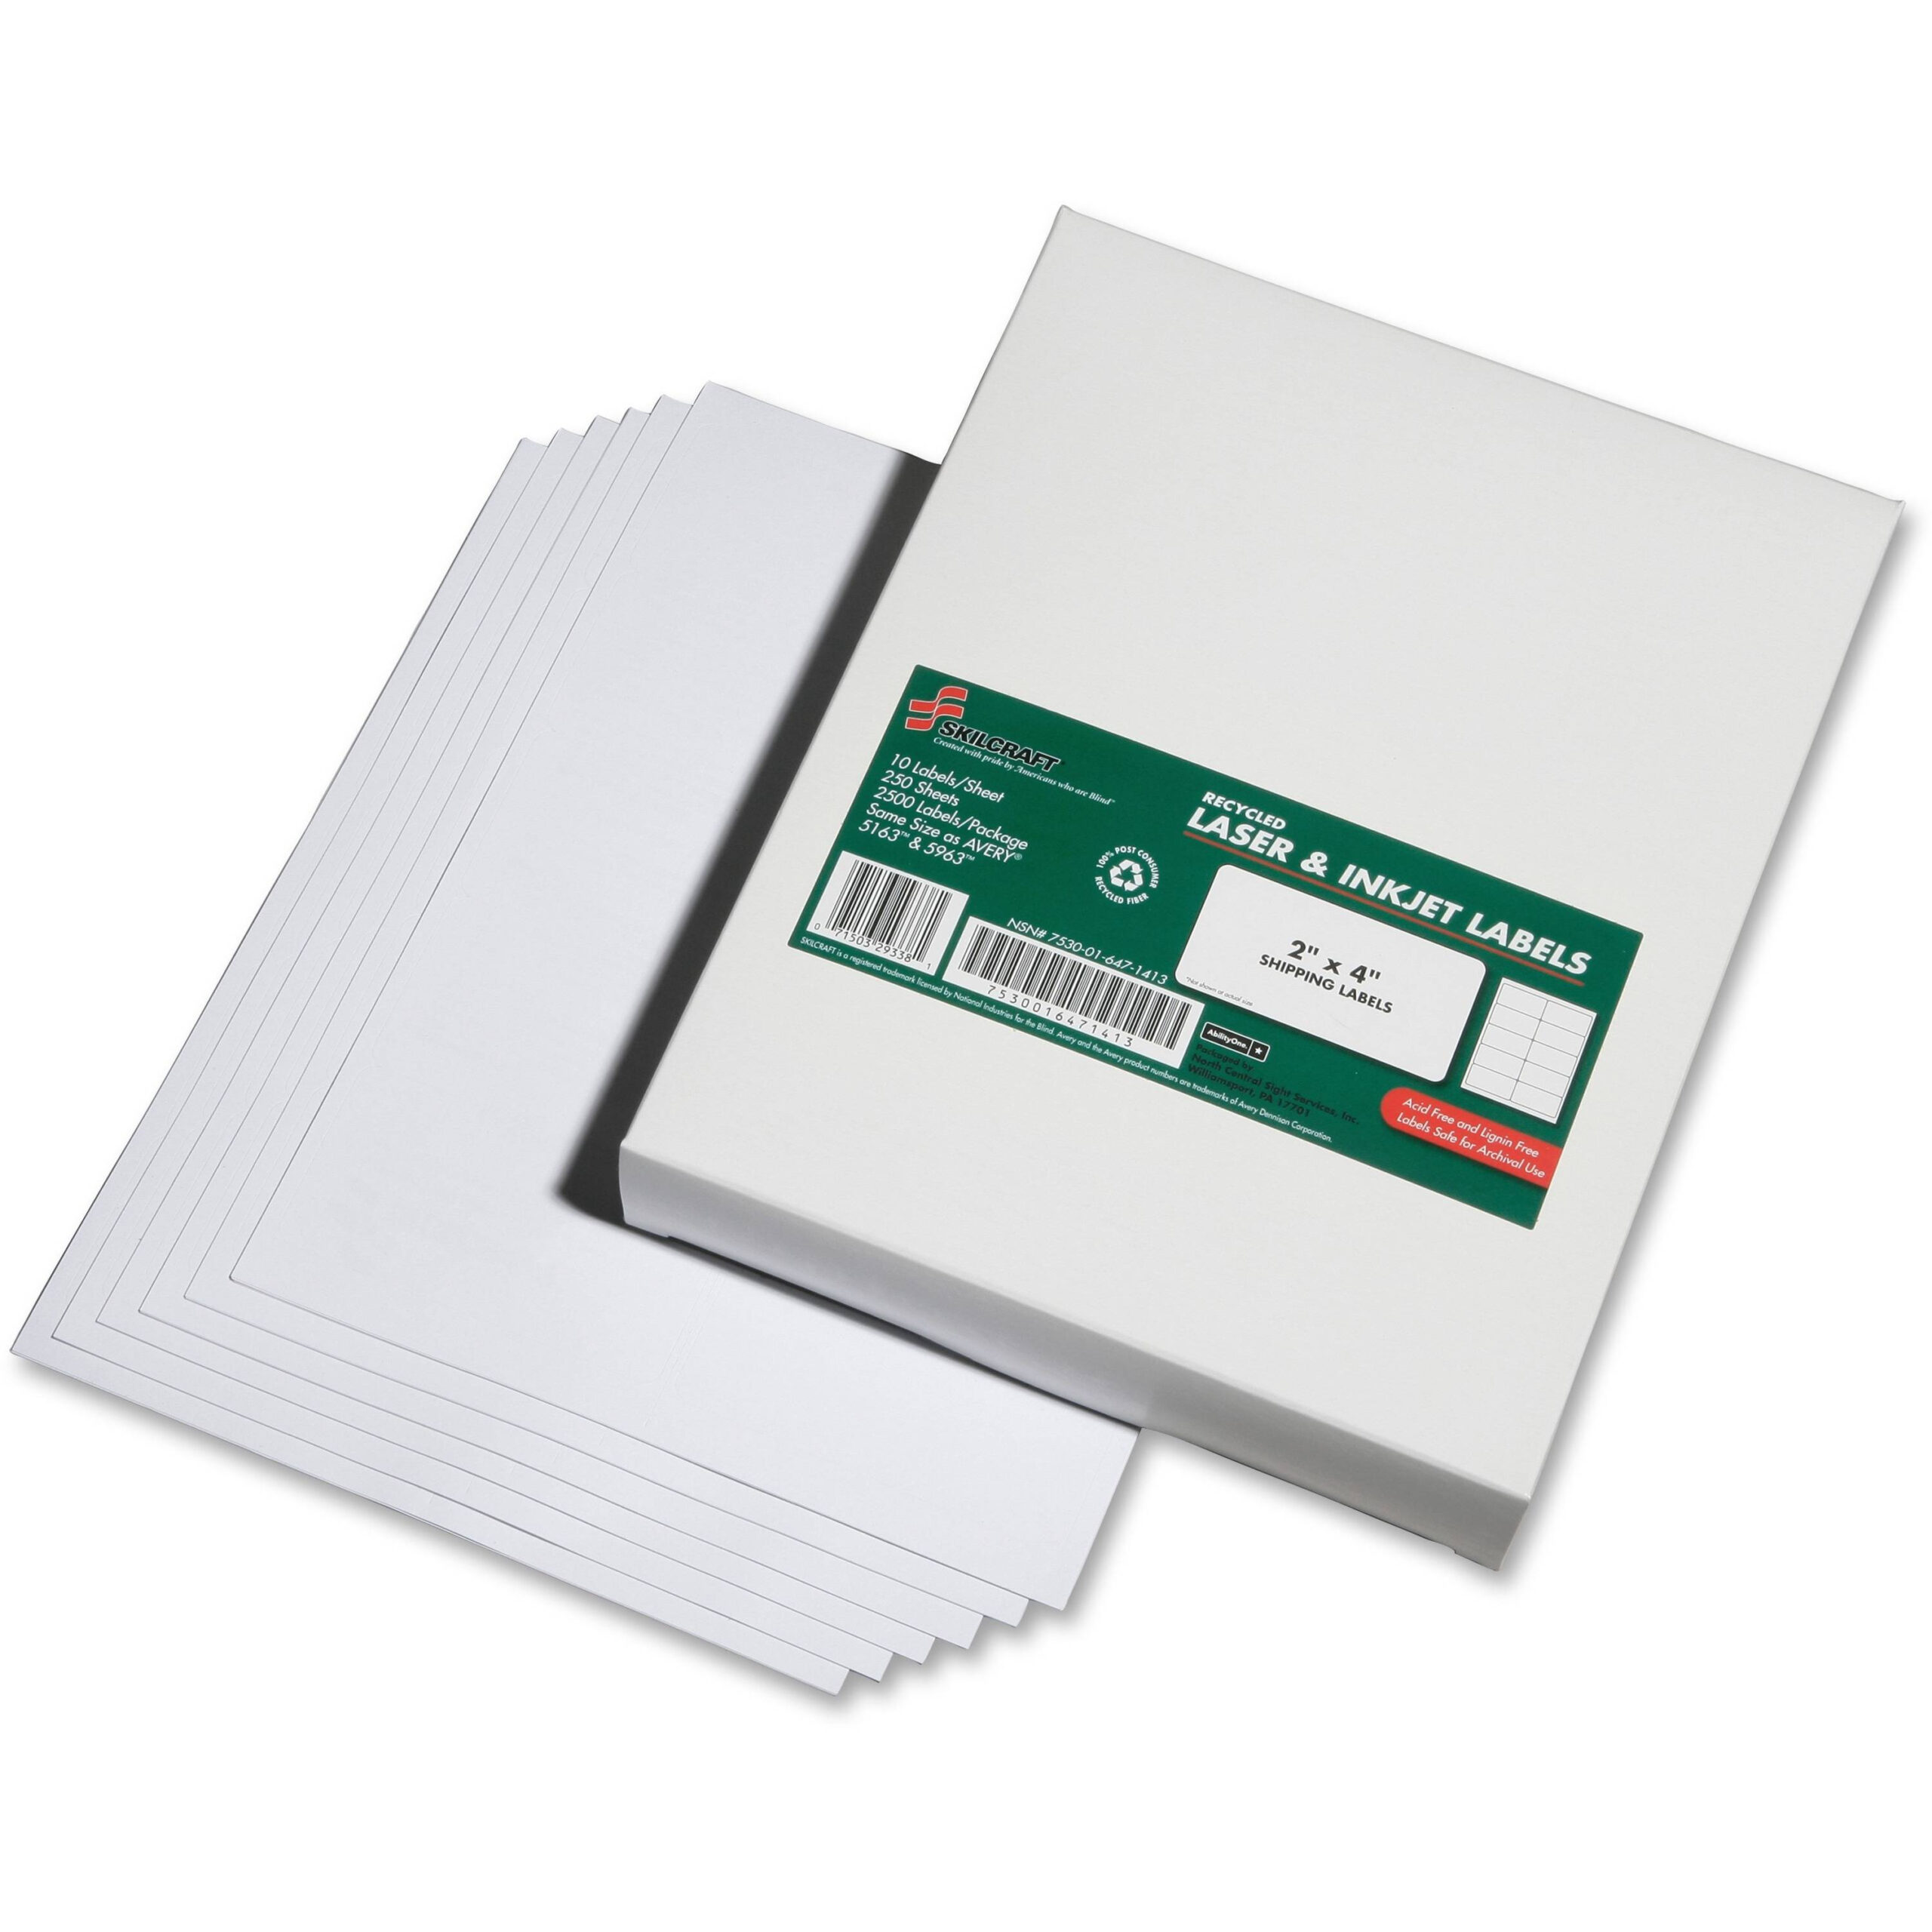 Avery 6460 Label Template With Regard To Laser Inkjet Labels Templates